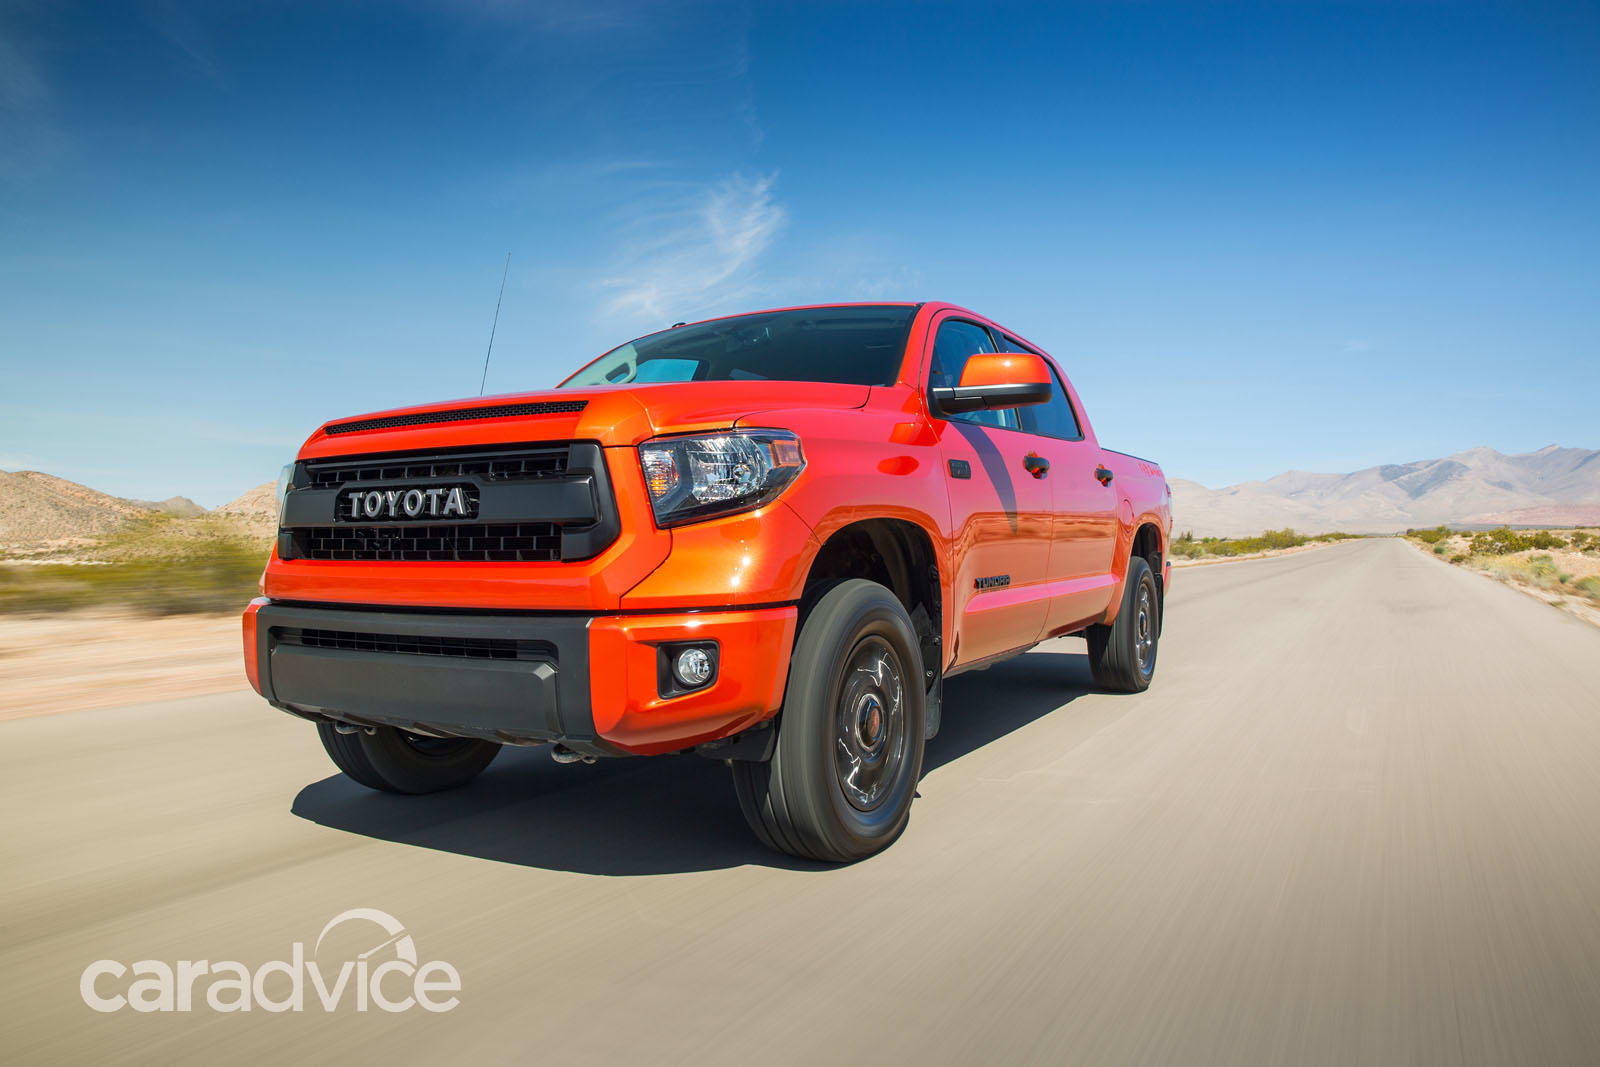 Toyota Tundra TRD Pro a "strong possibility" for Australia in 2015